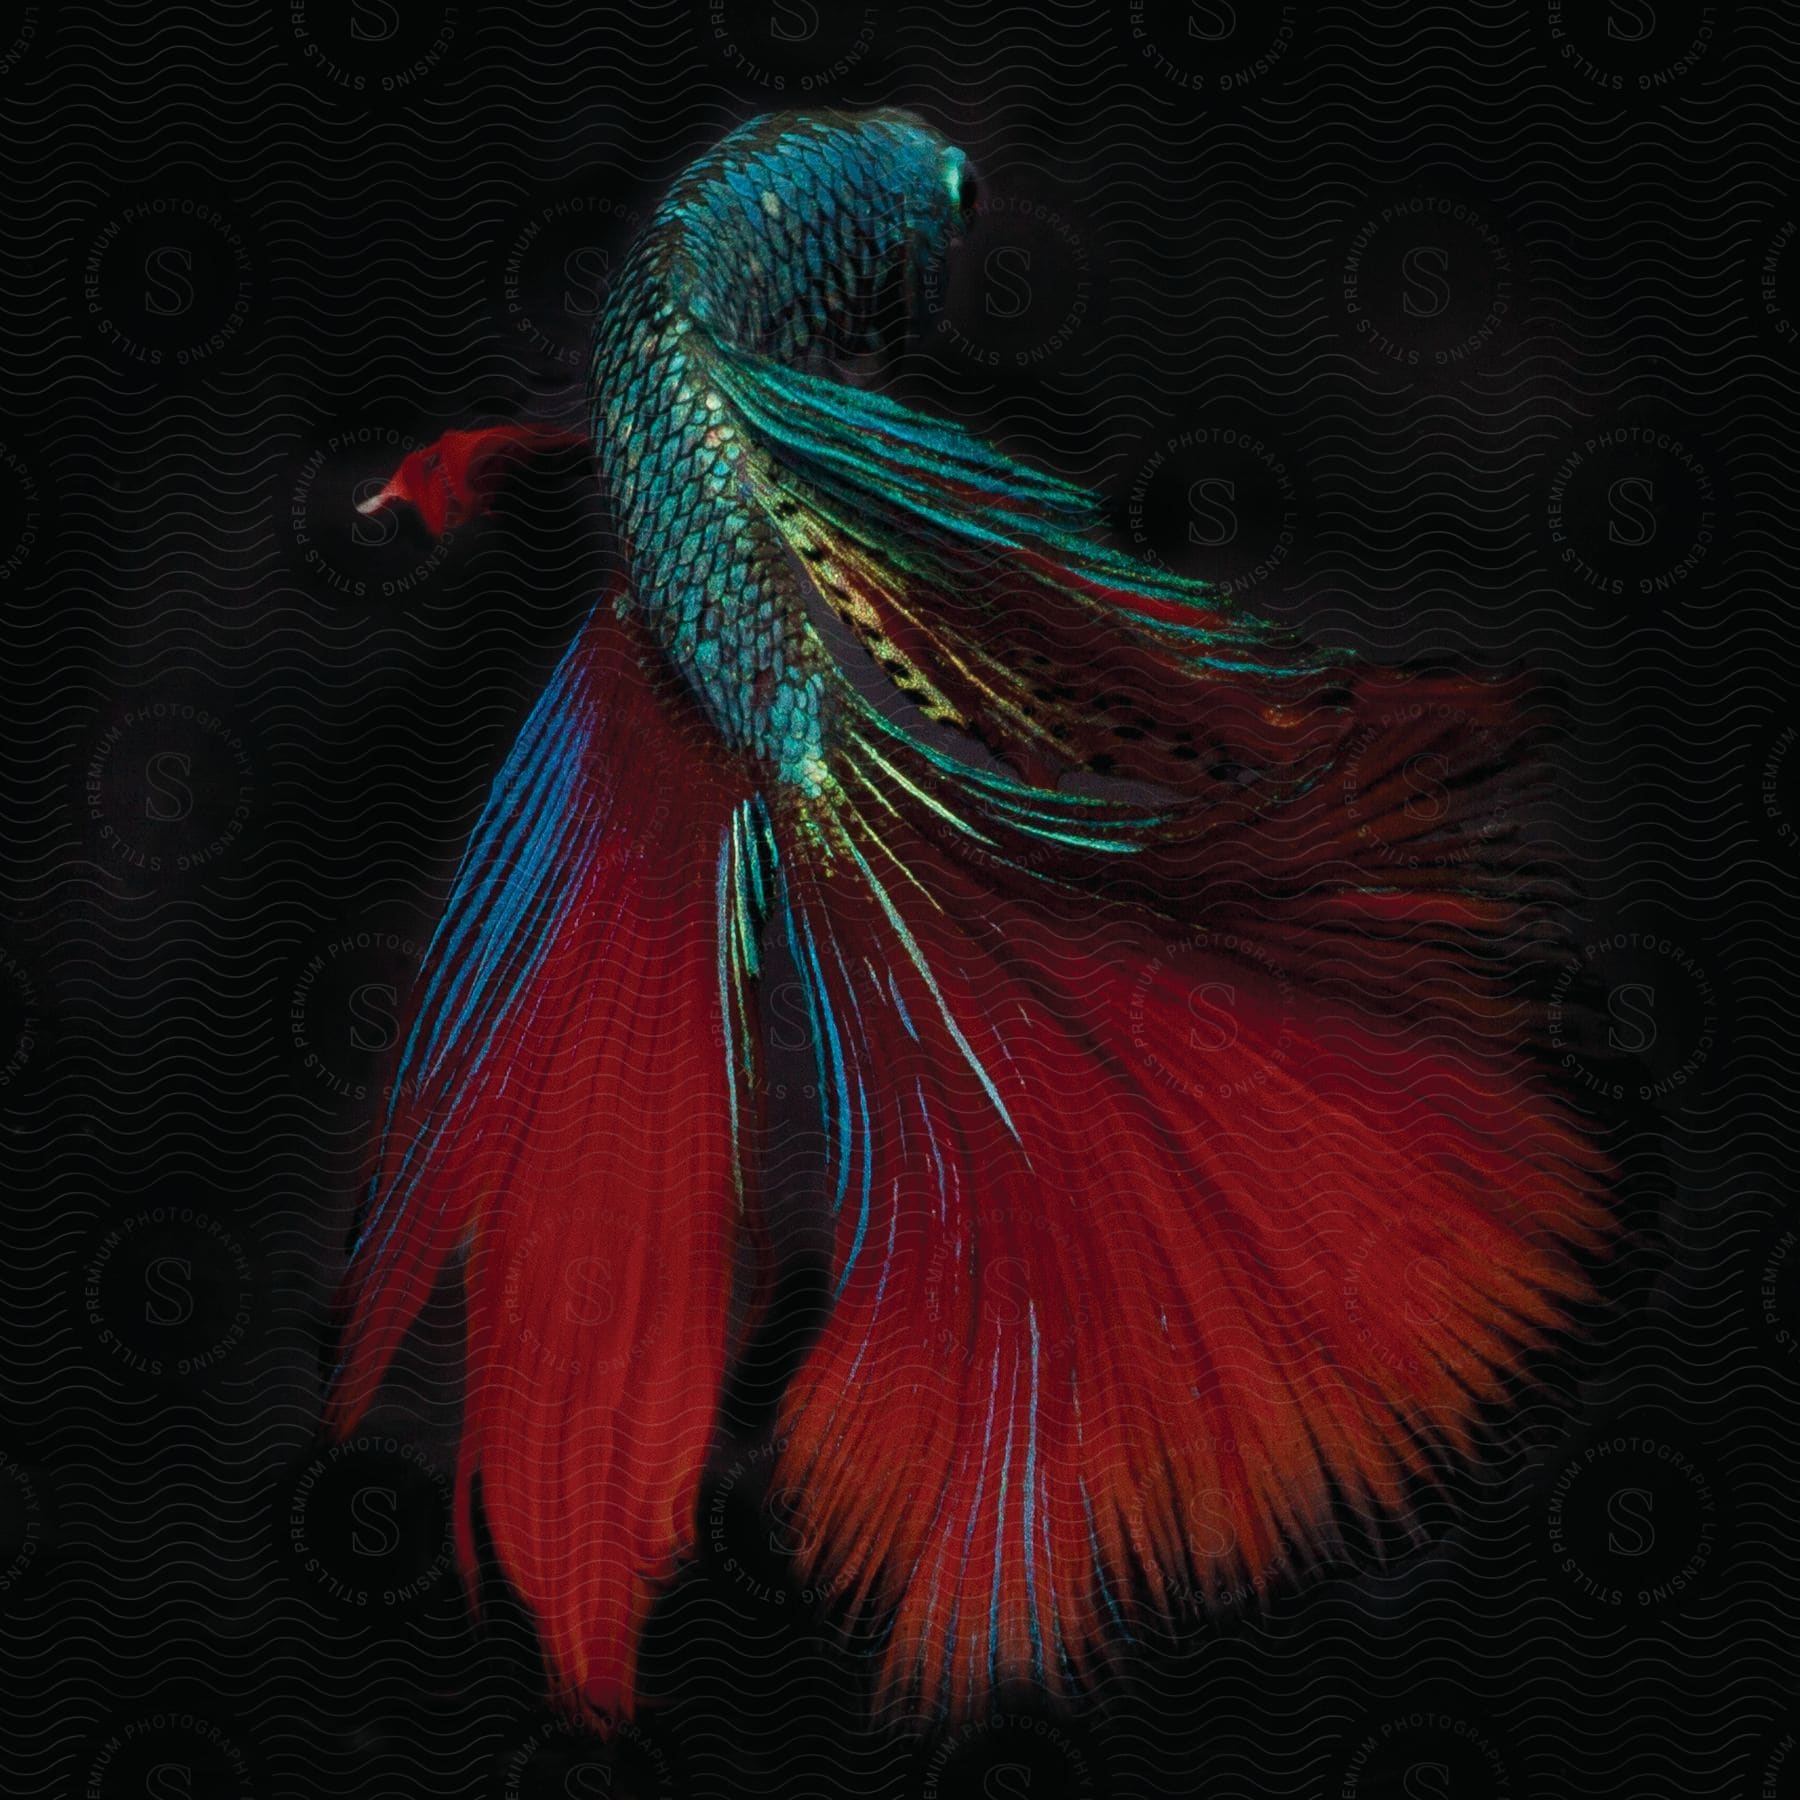 Stock photo of a realistic digital art of a fish with red fins